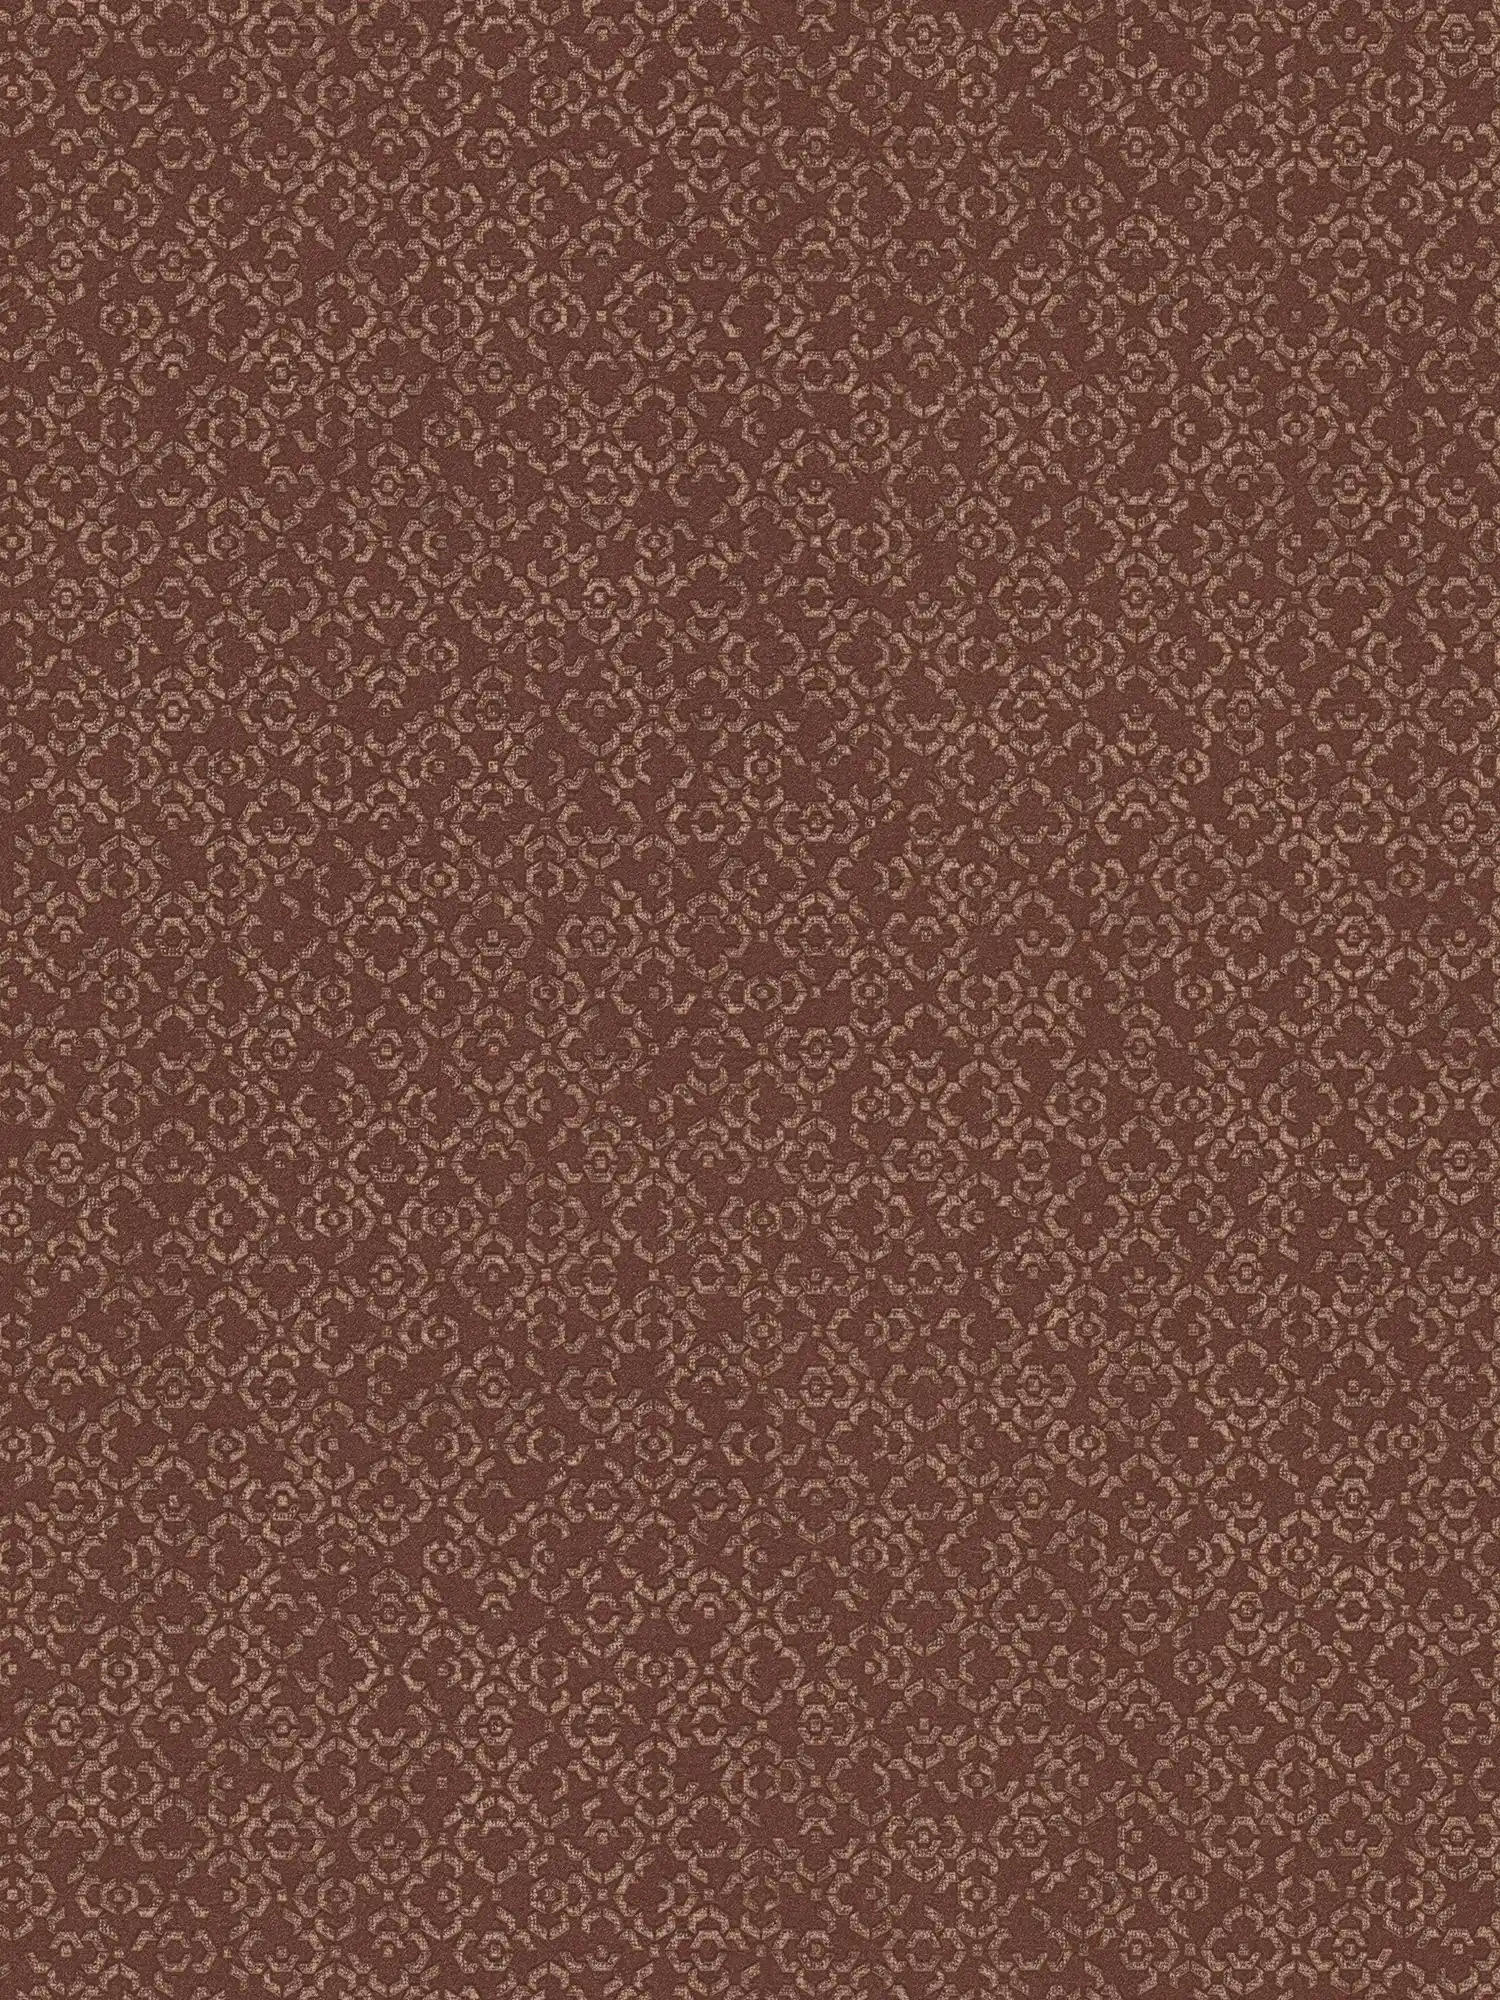 Wallpaper with 3D pattern effect and metallic luster - brown, metallic, red
